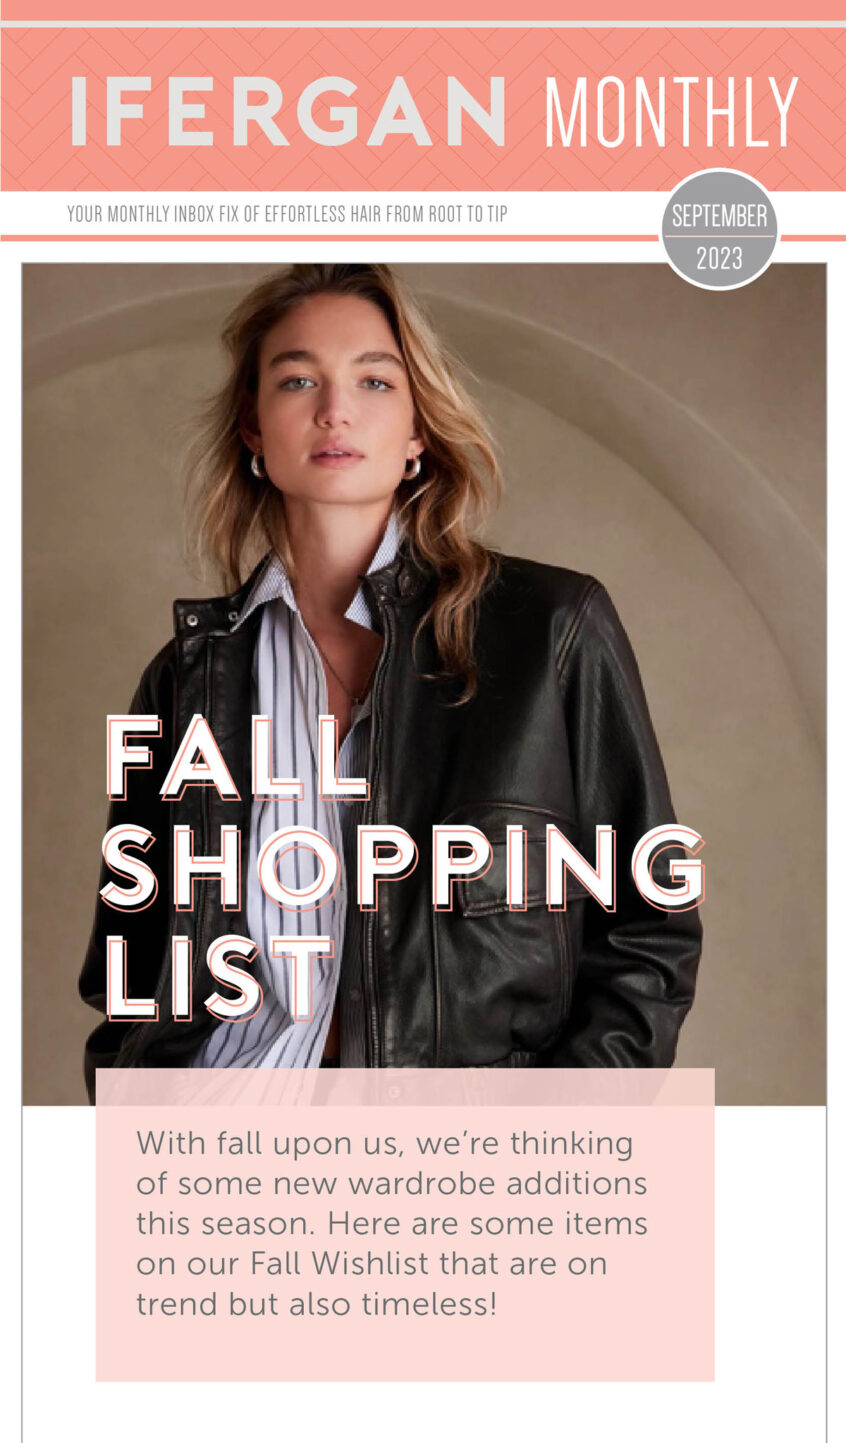 Fall Shopping List With fall upon us, we’re thinking of some new wardrobe additions this season. Here are some items on our fall Wishlist that are on trend but also timeless!